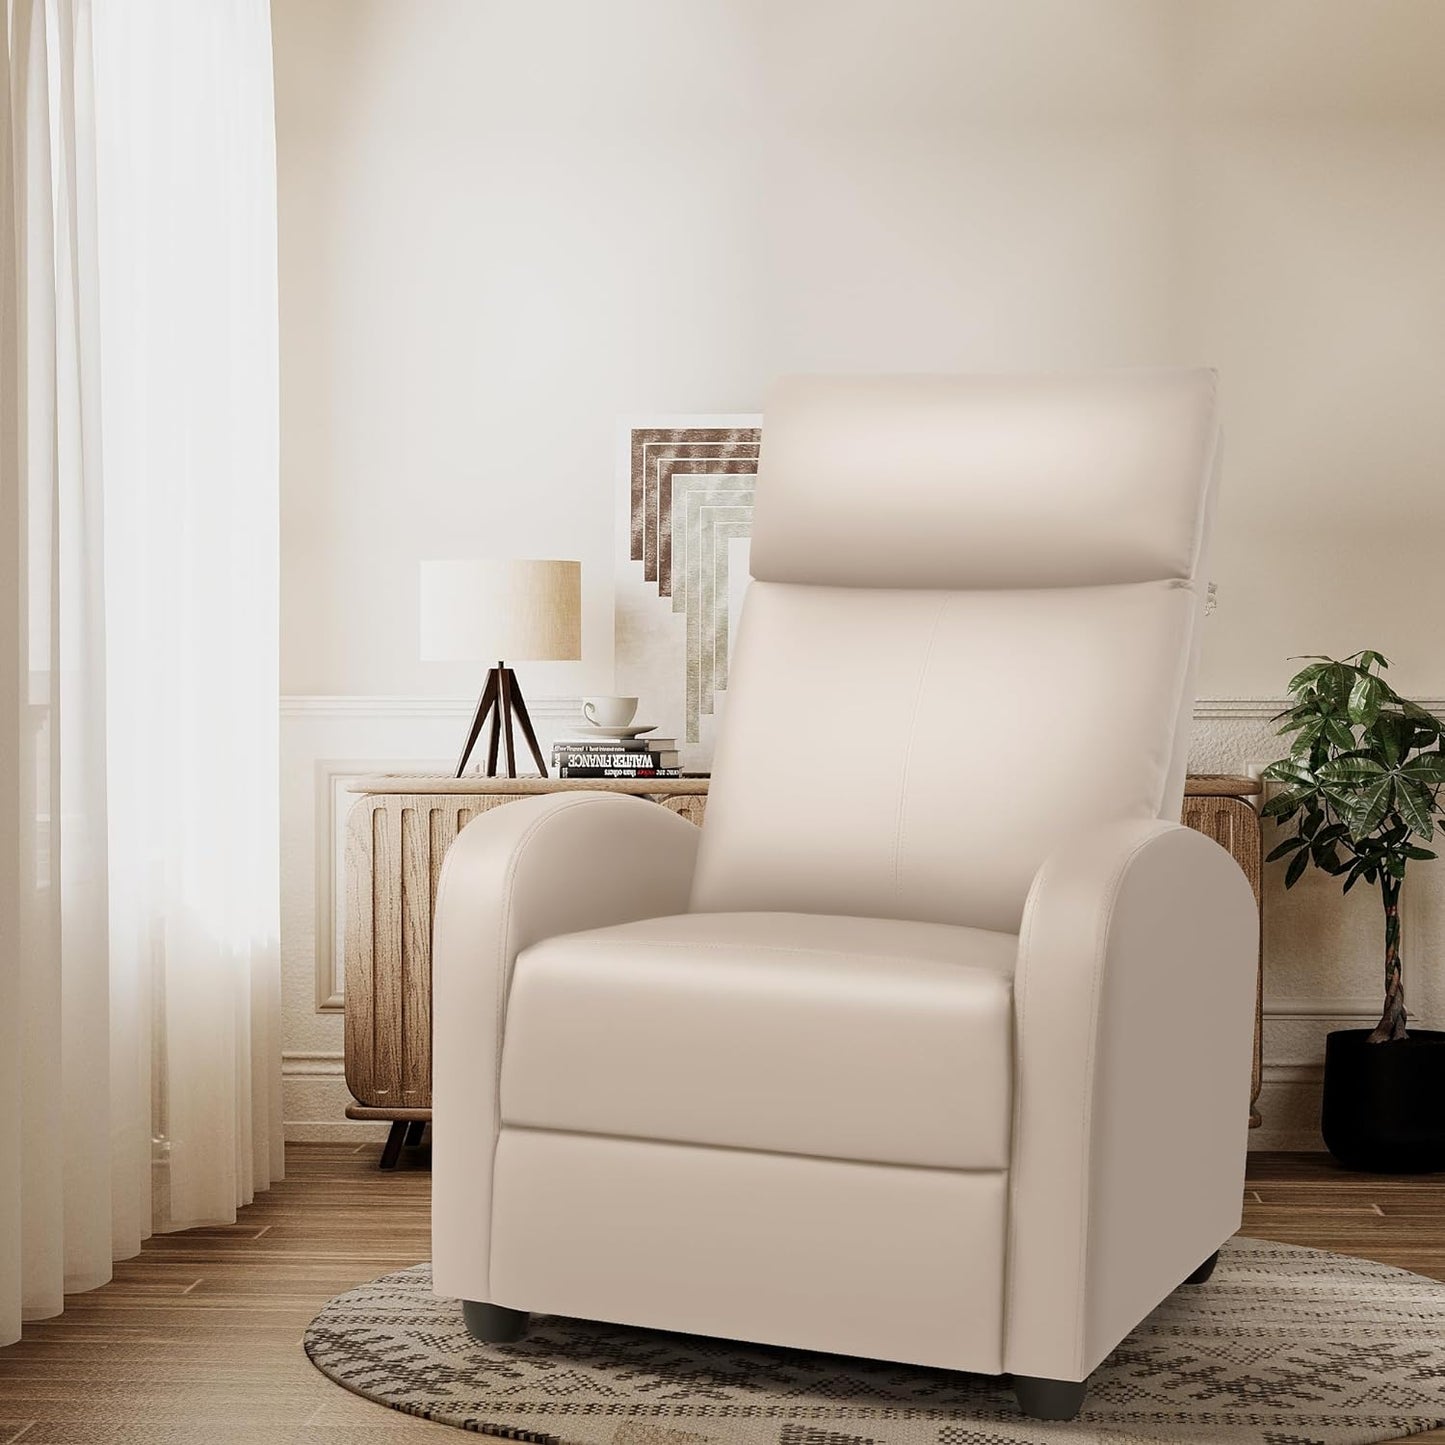 Rankok Recliner Chair Modern PU Leather Reclining Chair Ergonomic Adjustable Recliner for Living Room Home Theater Seating Single Sofa (Beige)